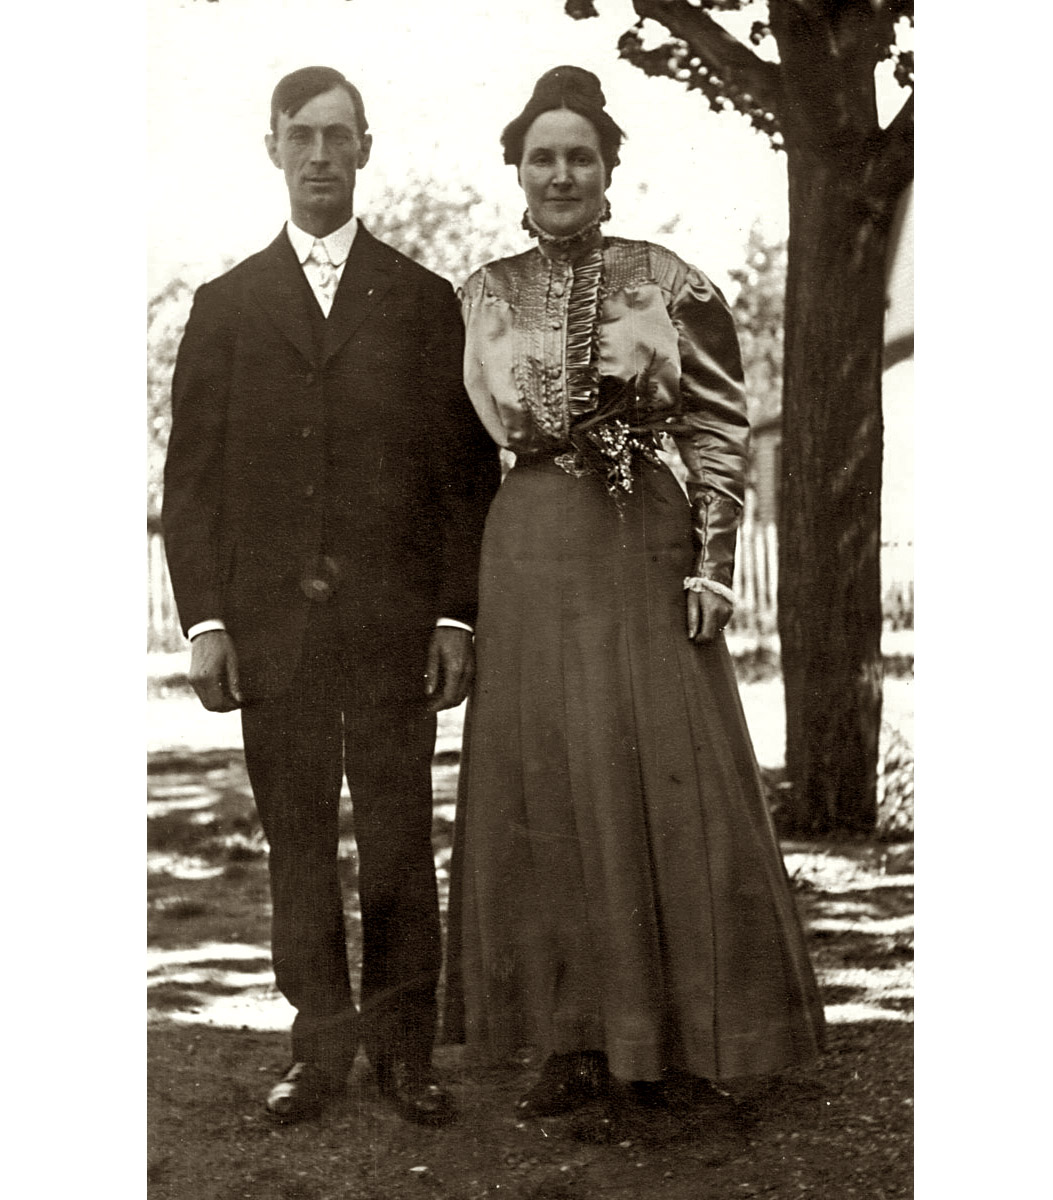 Fred Carpenter and his wife, Nell (Pickering) Carpenter, in their finery on their wedding day, 1909. Family history has it they spent the scandalous amount of $13.10 on their week-long wedding trip! Fred was from Surry, NH; Nell was from nearby Gilsum. They settled in Keene.